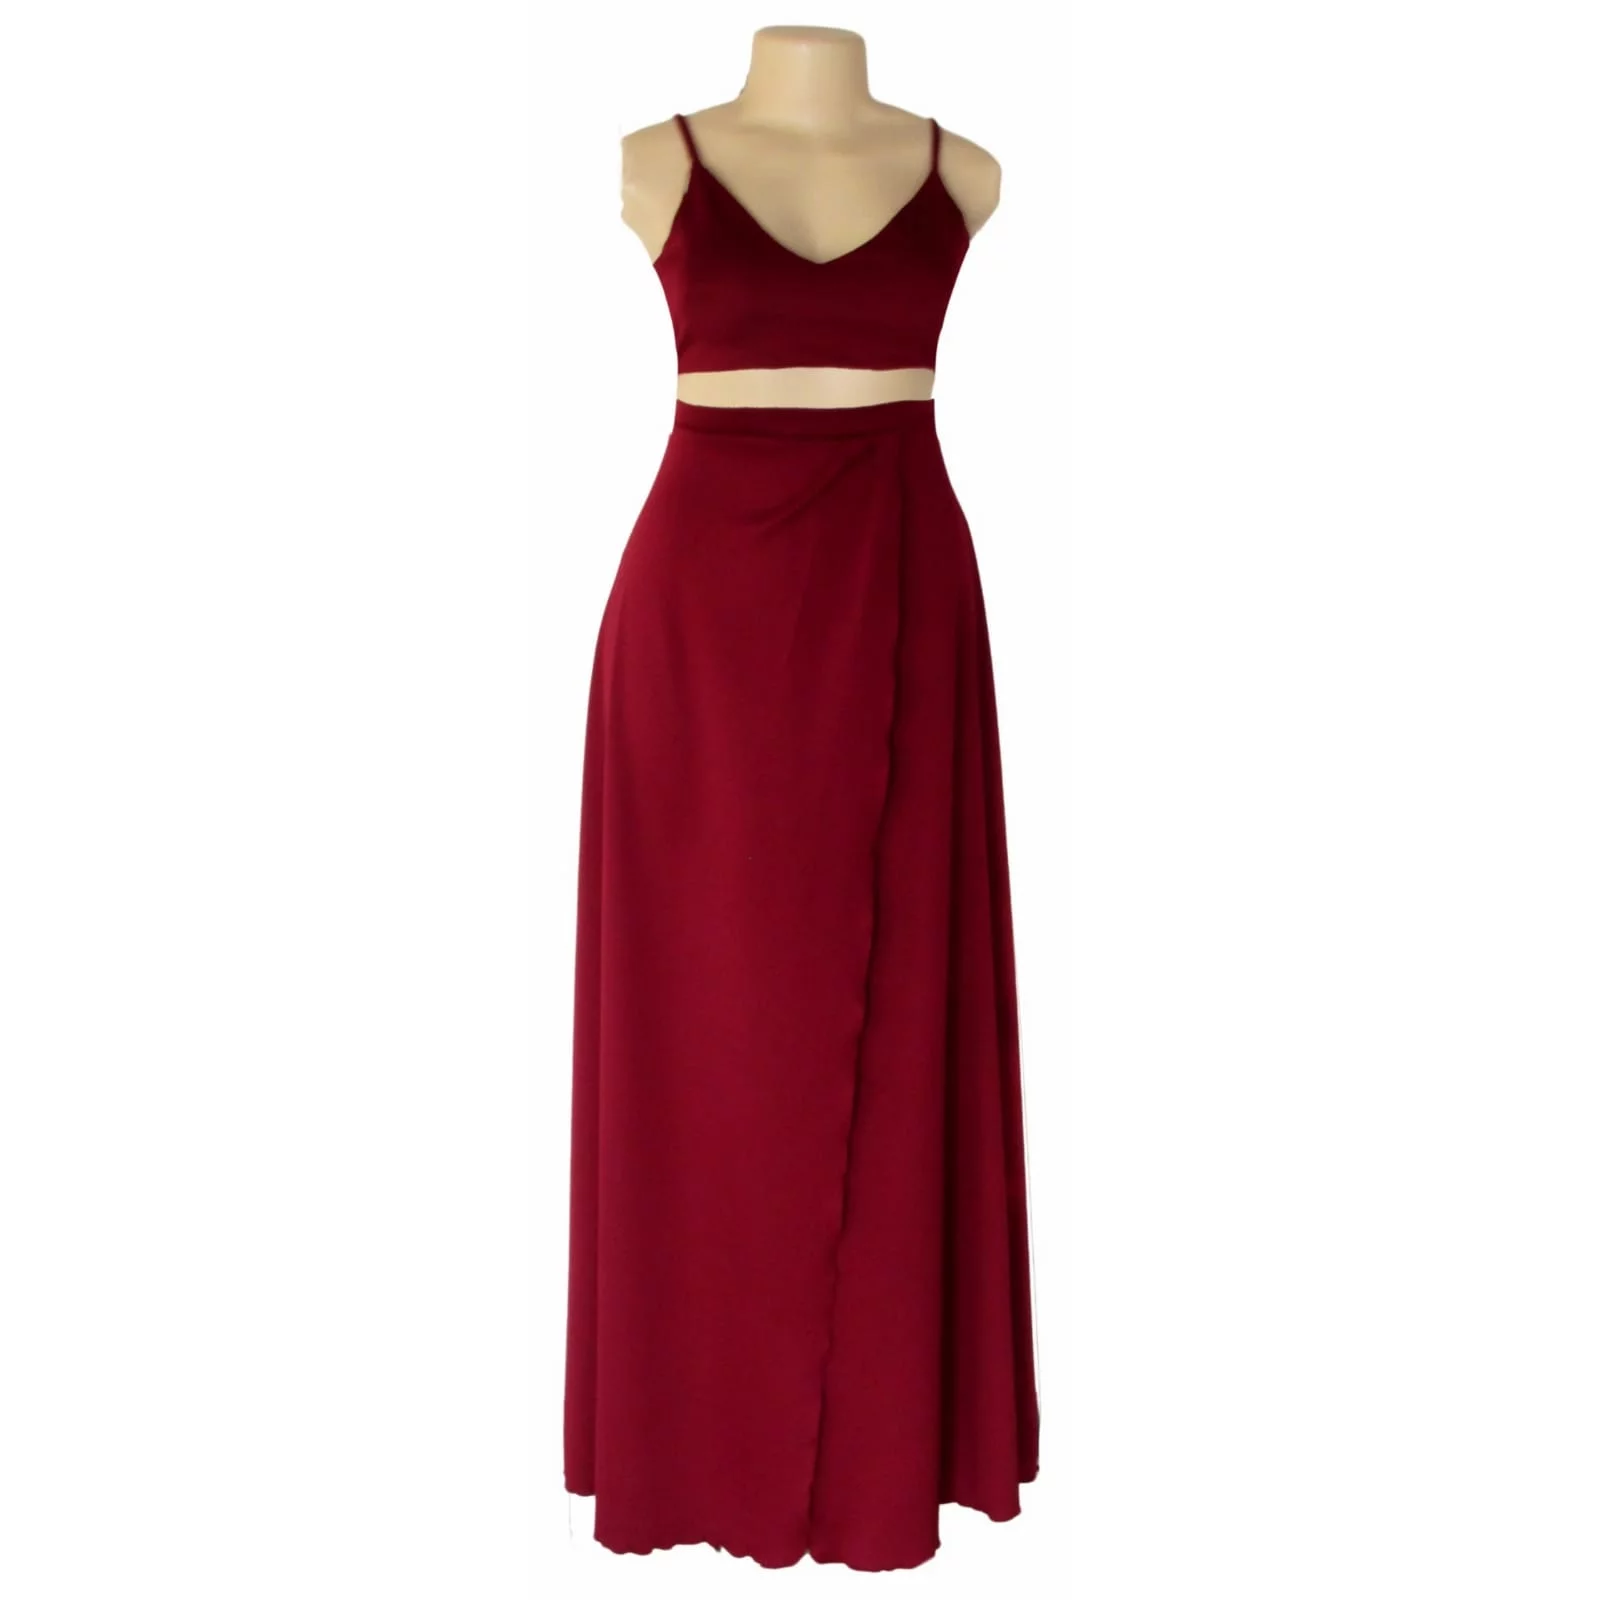 Maroon 2 piece smart casual wear 1 maroon 2 piece smart casual wear with a crop top and a long skirt with a crossed slit.